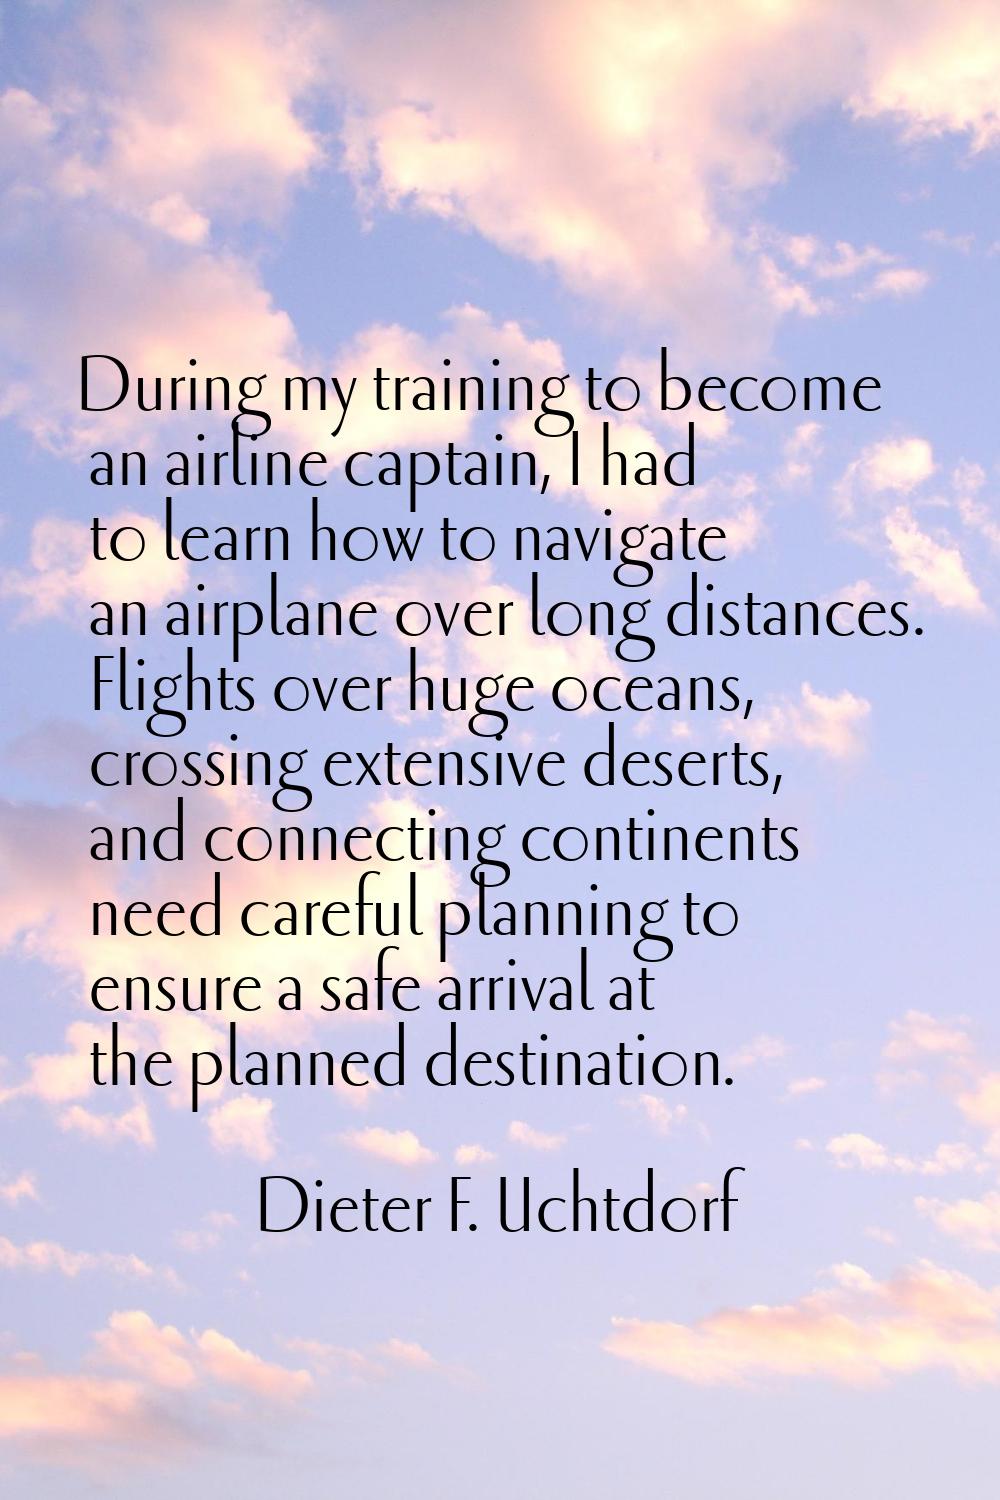 During my training to become an airline captain, I had to learn how to navigate an airplane over lo